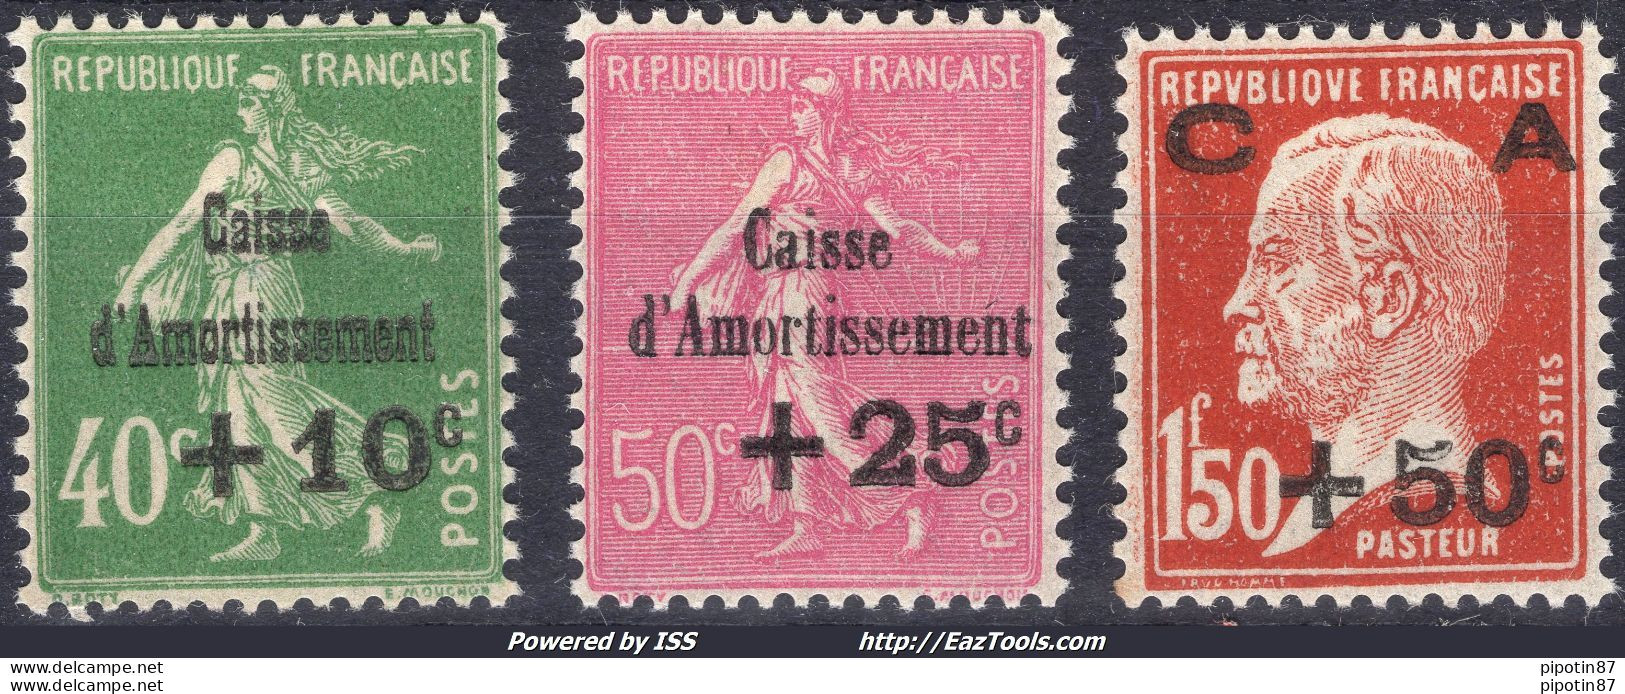 FRANCE CAISSE D'AMORTISSEMENT N° 253/255 NEUF * AVEC CHARNIERE - Nuovi